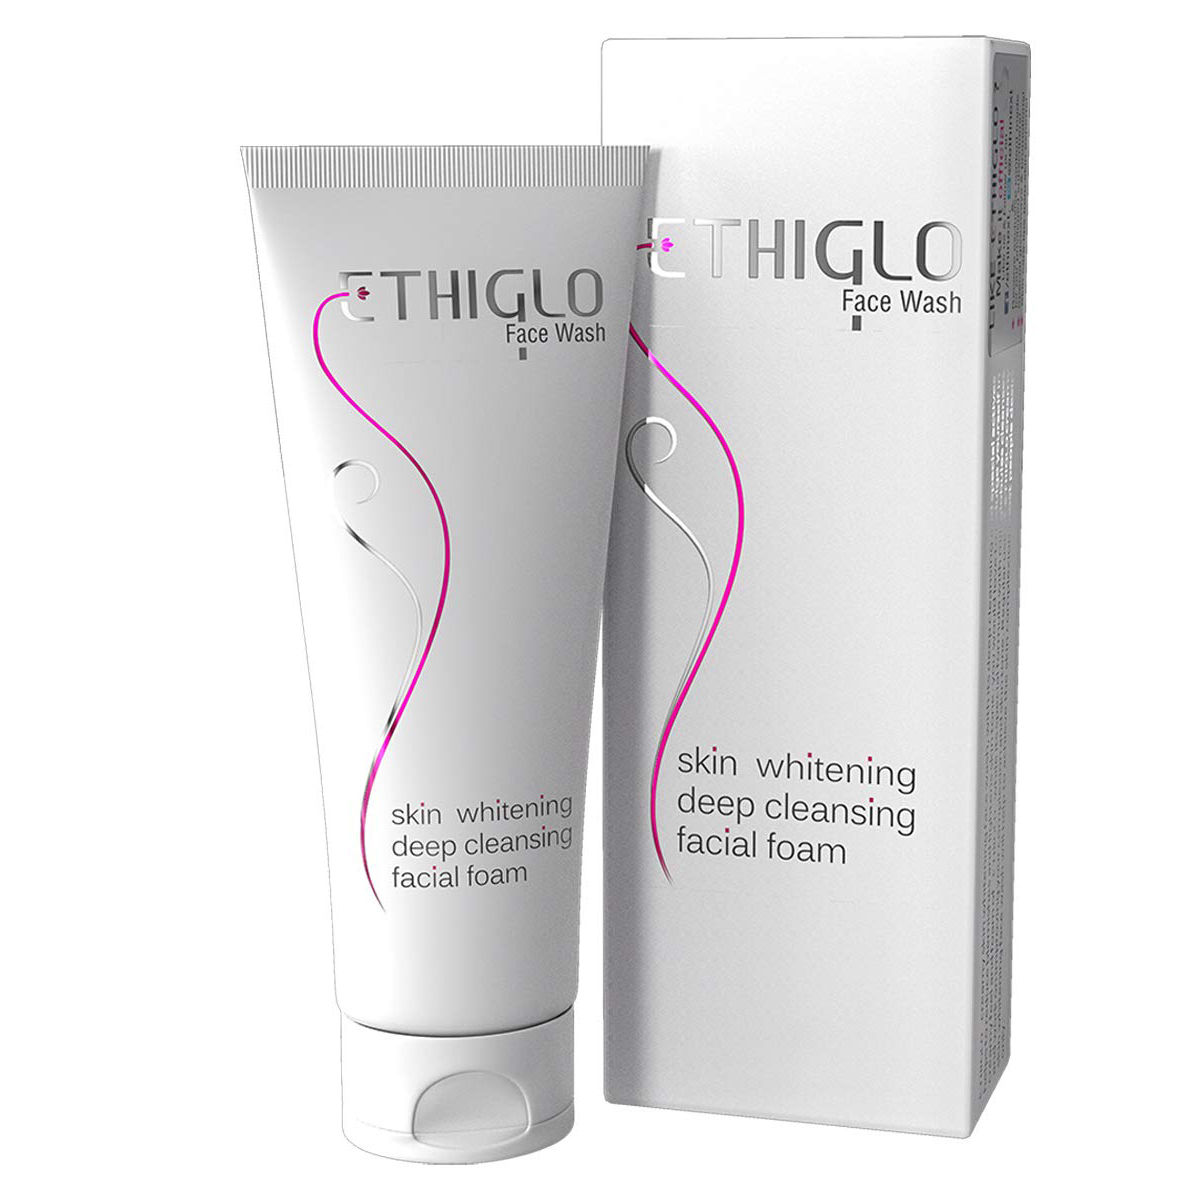 Ethiglo Skin Whitening Deep Cleansing Facial Foam Face Wash, 70 ml, Pack of 1 